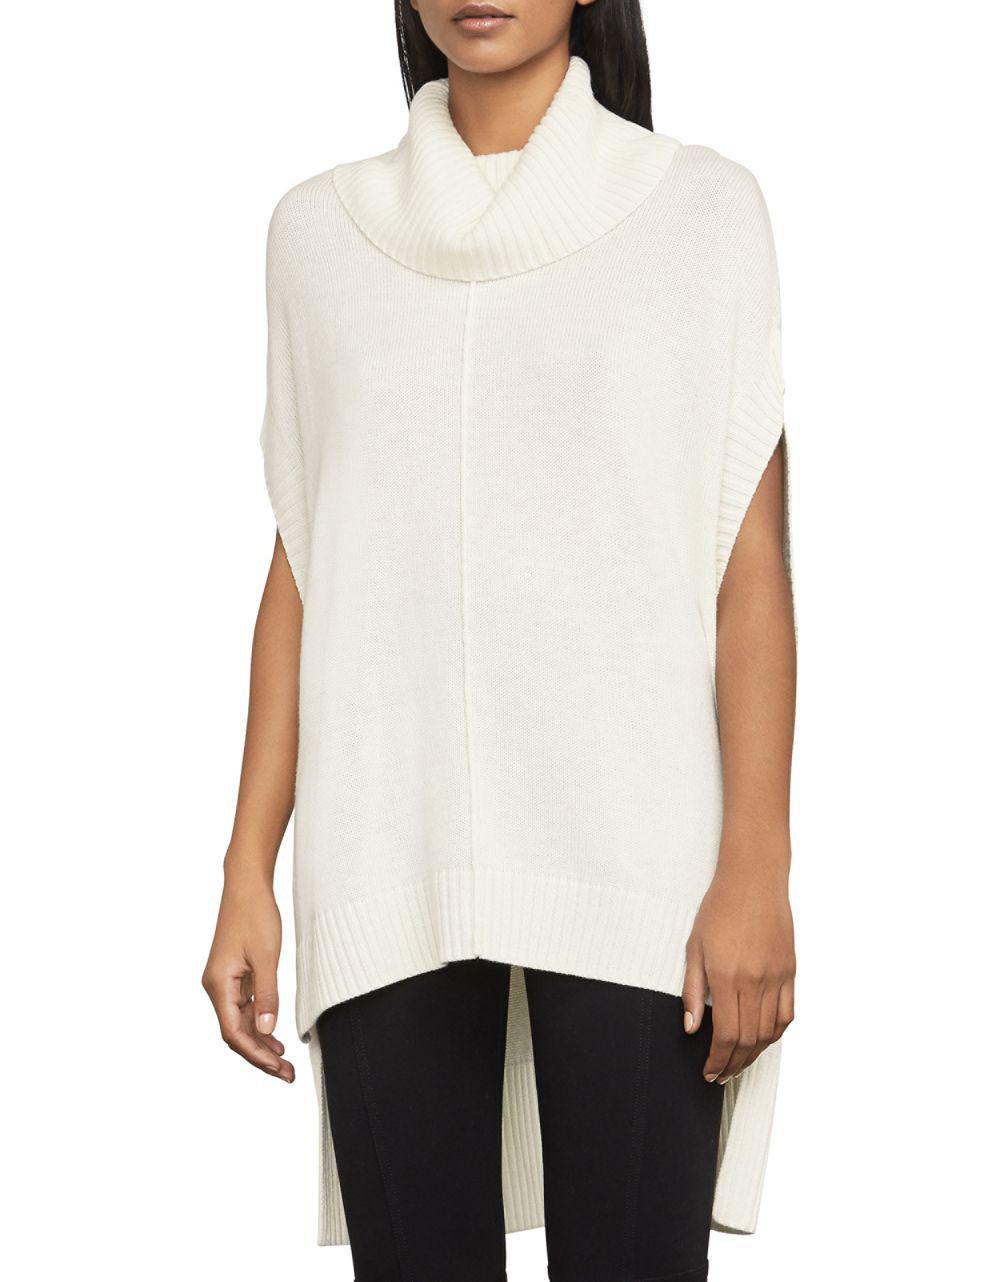 BCBGMAXAZRIA Synthetic Corina Knit Oversized Sweater Top in White - Lyst